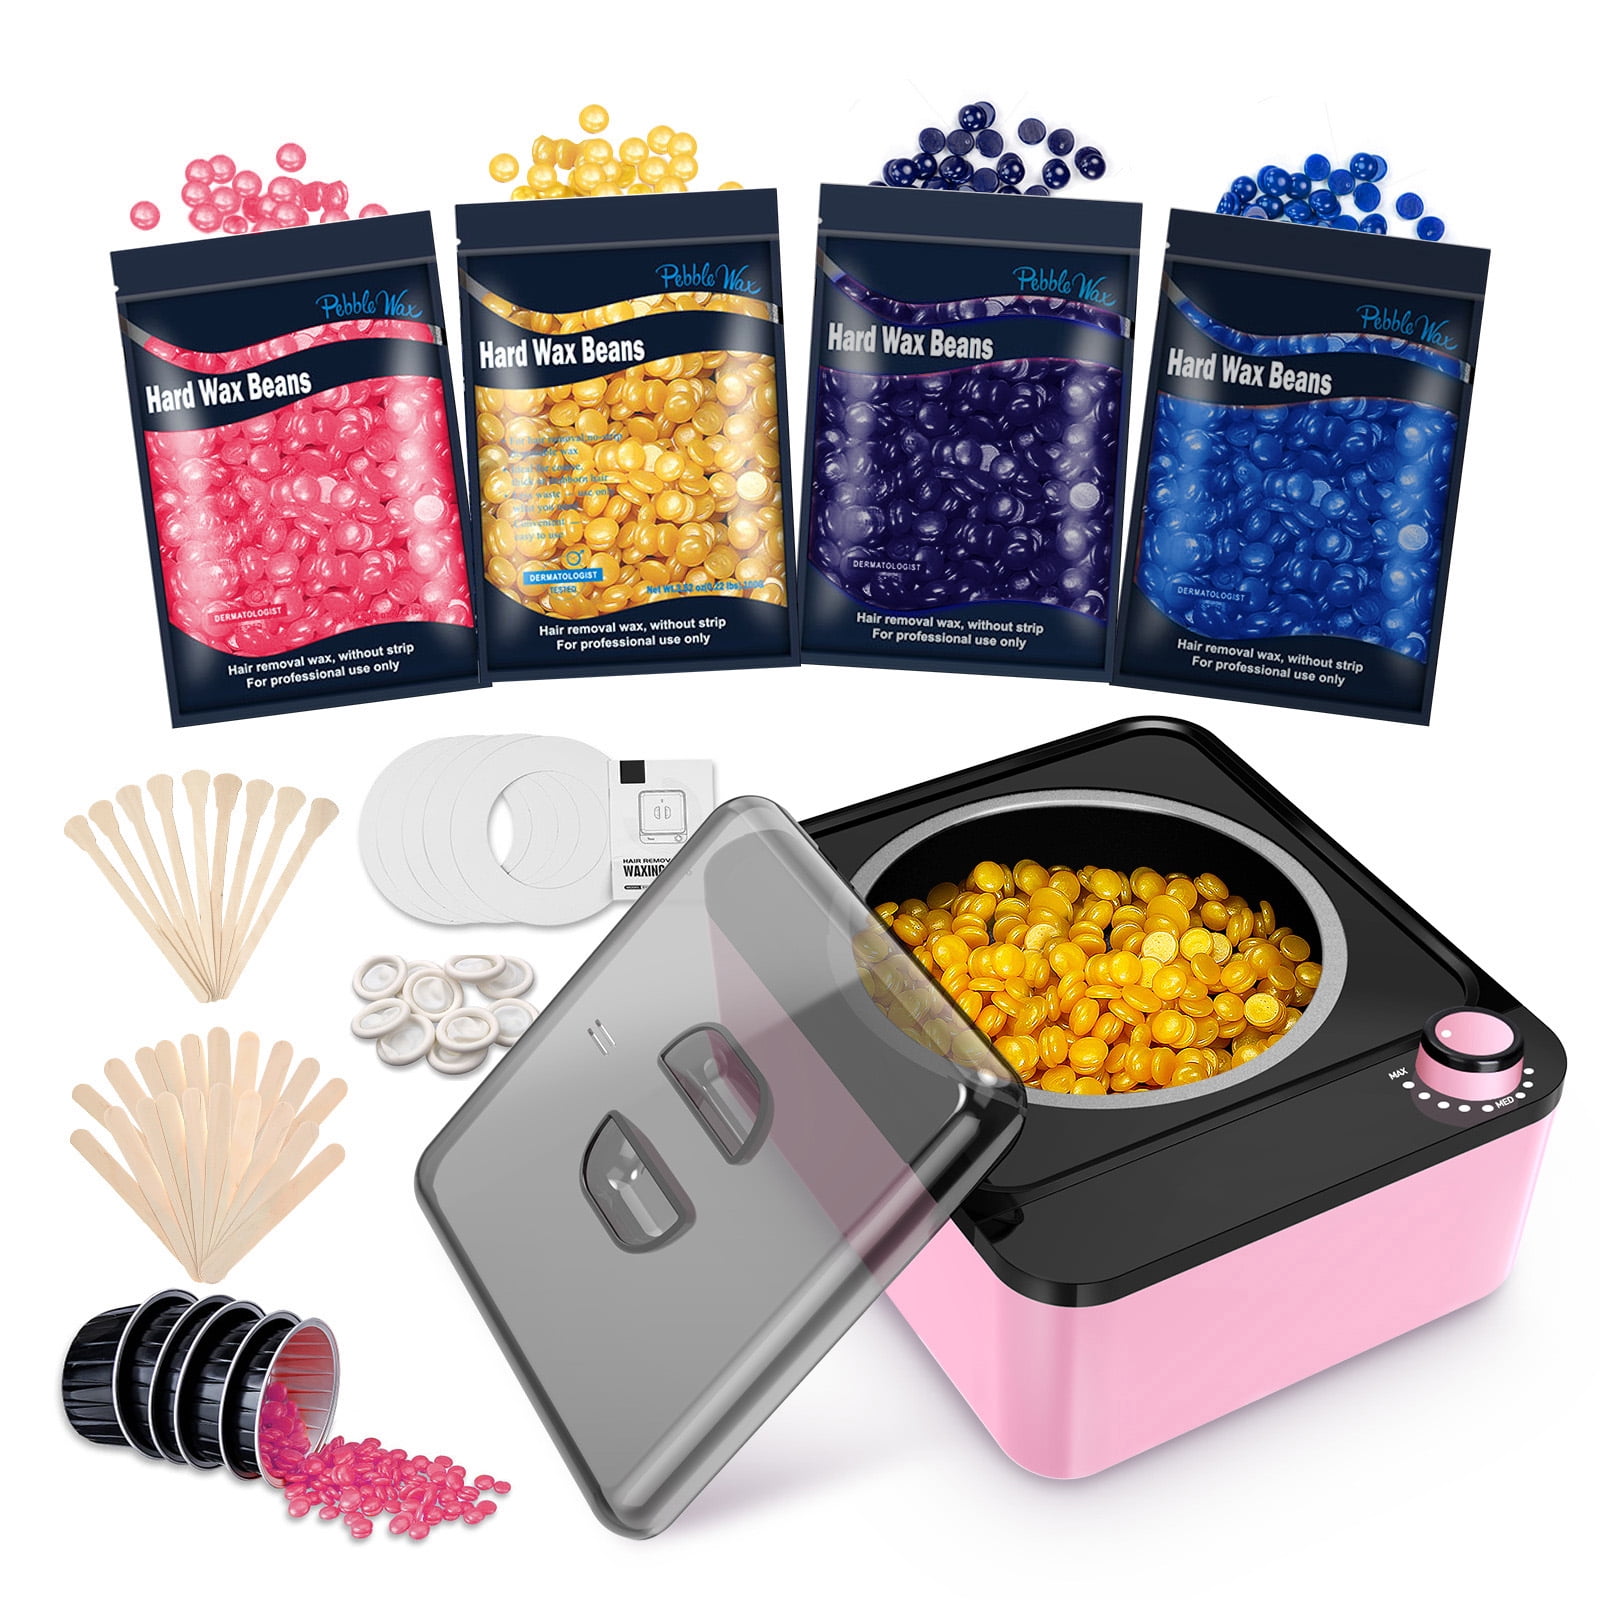 Waxing Kit Wax Warmer Easkep - Wax Kit Hair Removal 6 Adjustable  Temperature with 5 Packs Hard Wax Beads and 20 pcs Wooden Applicator Sticks  Painless